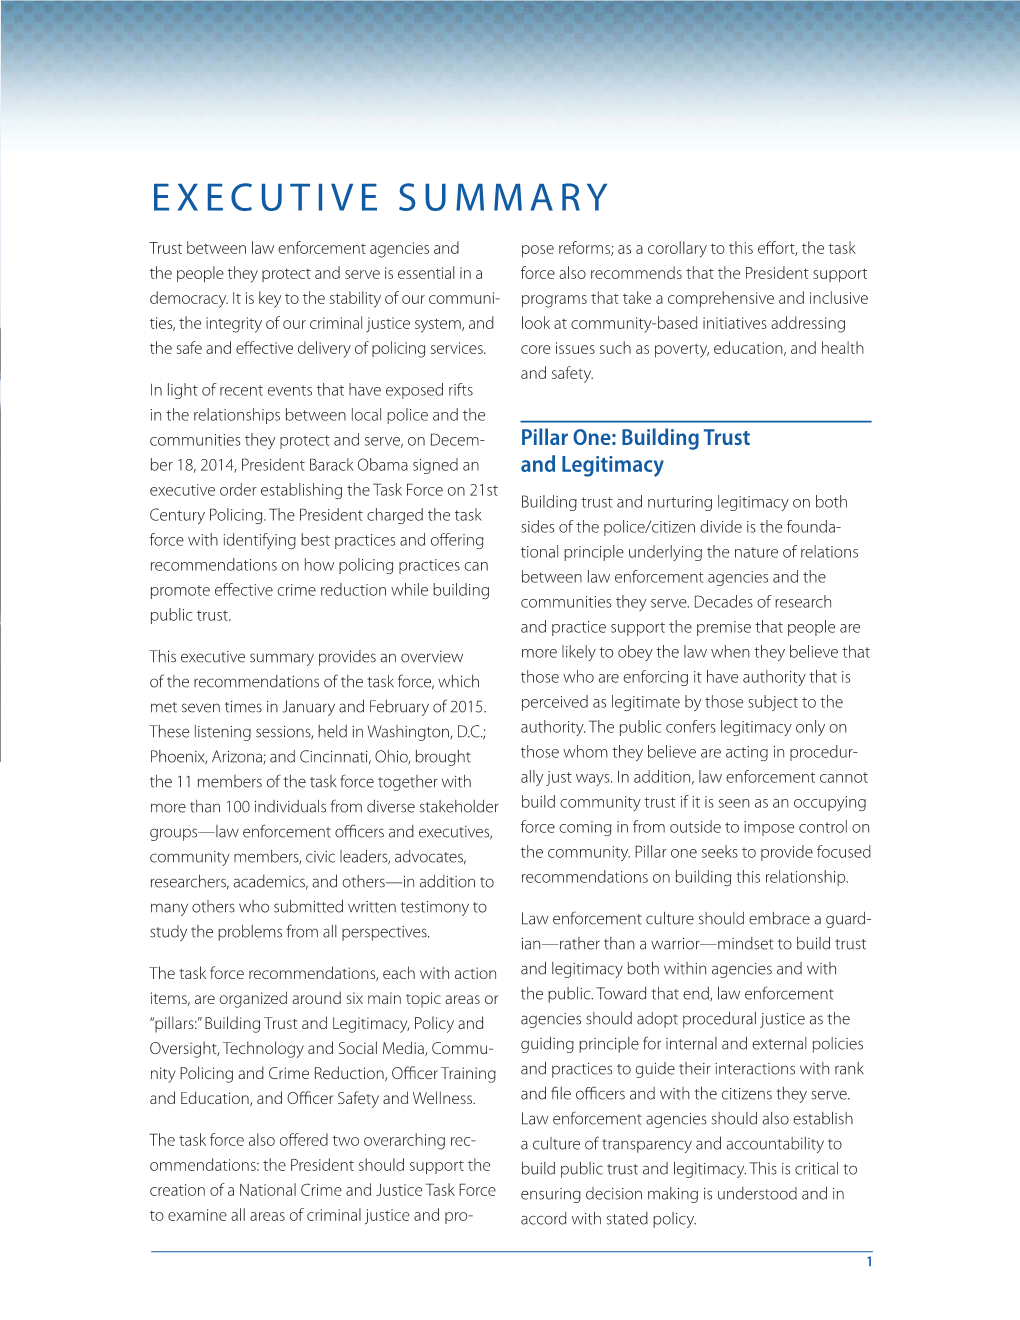 Executive Summary: Final Report of the President's Task Force on 21St Century Policing